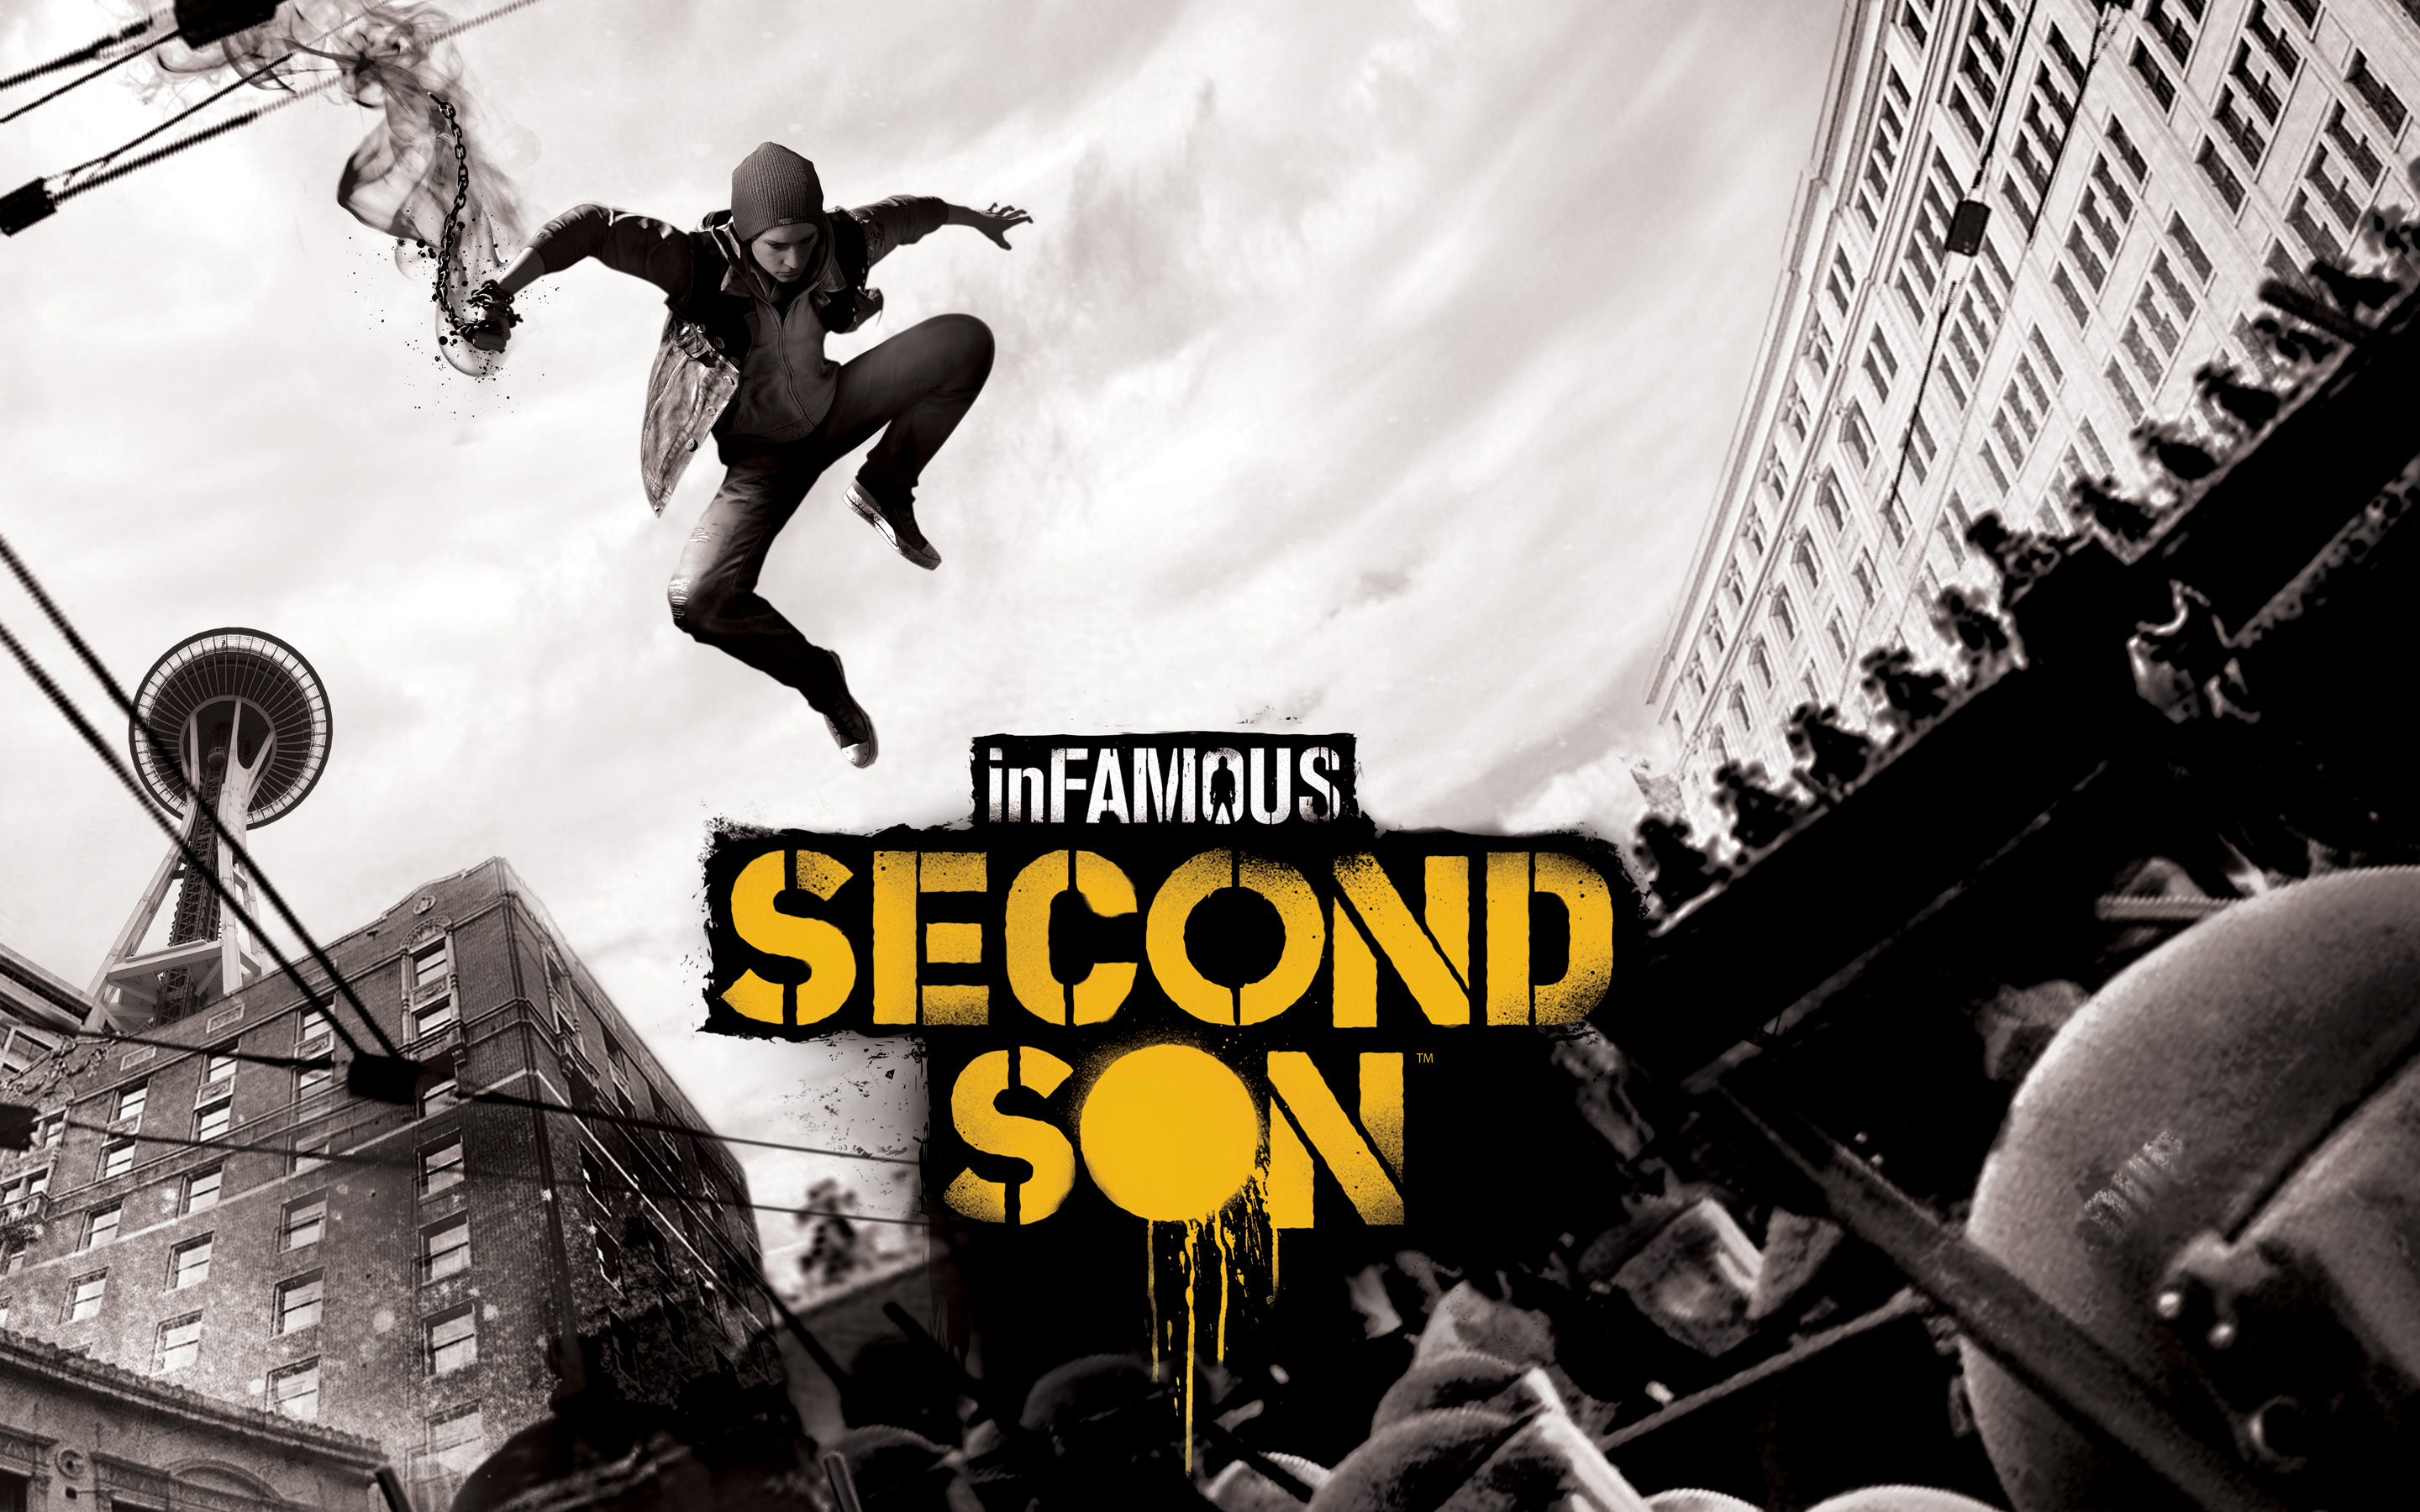 infamous 2 steam download free